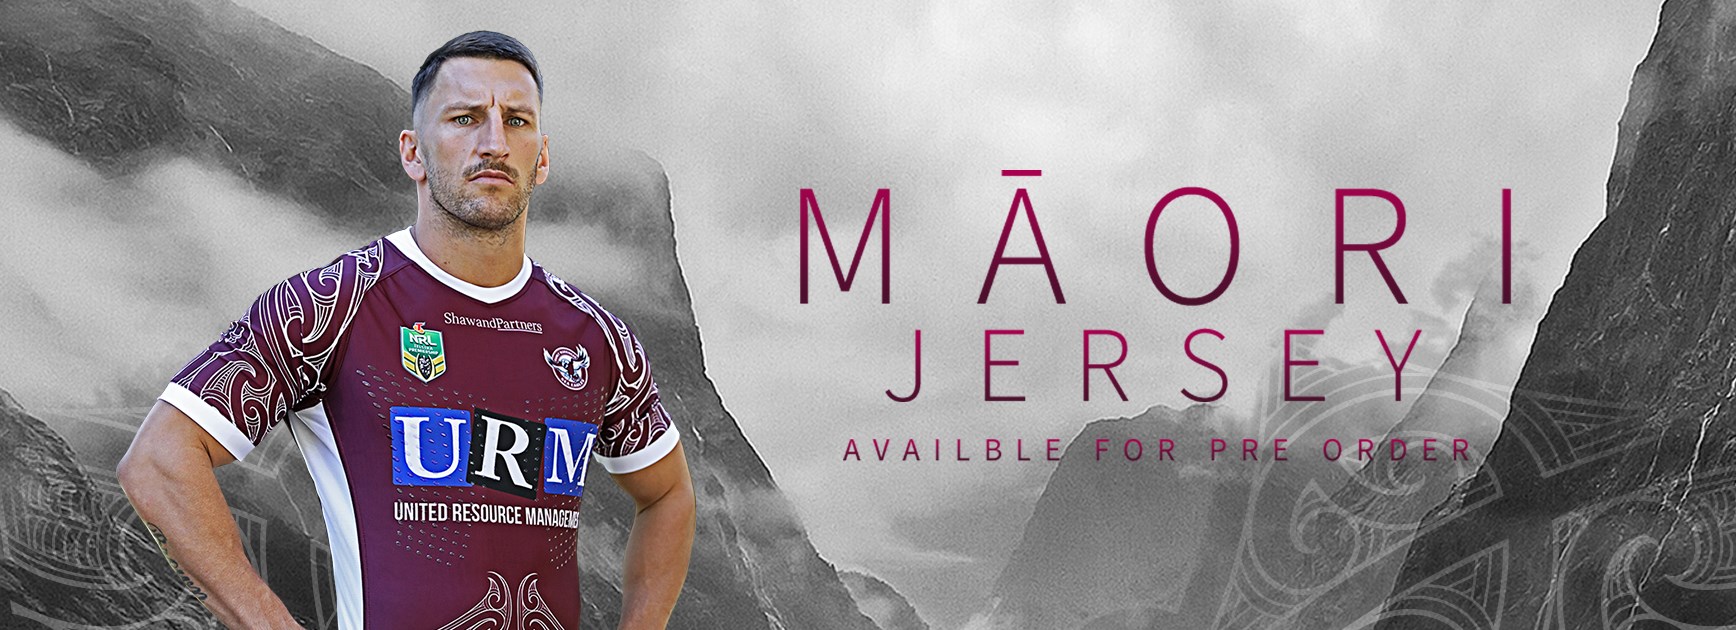 Ngāi Tahu unveils special Manly Sea Eagles jersey for match against Warriors